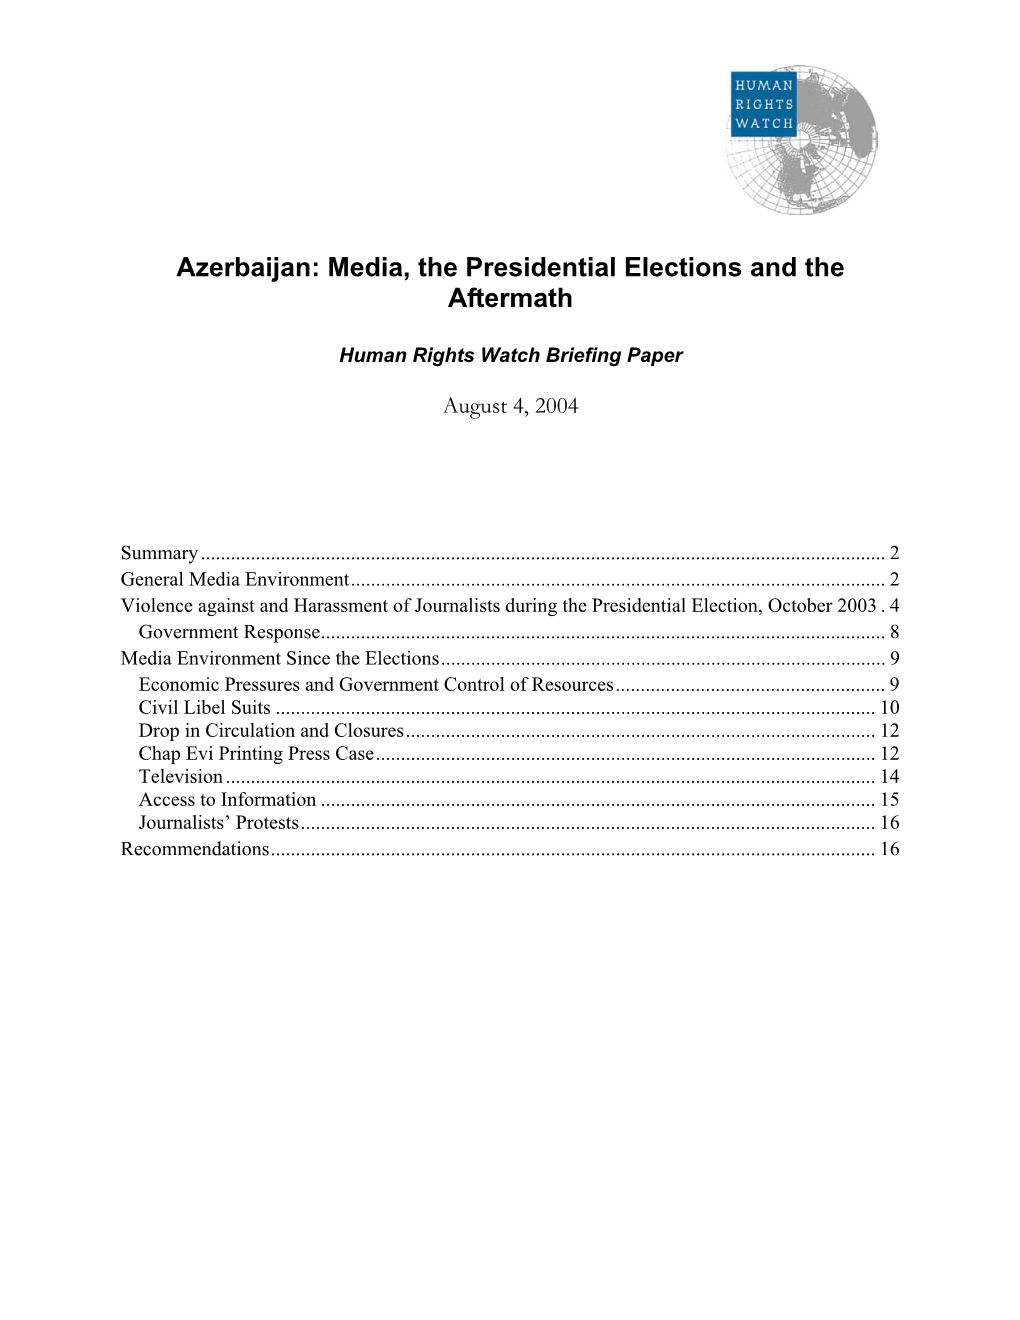 Azerbaijan: Media, the Presidential Elections and the Aftermath